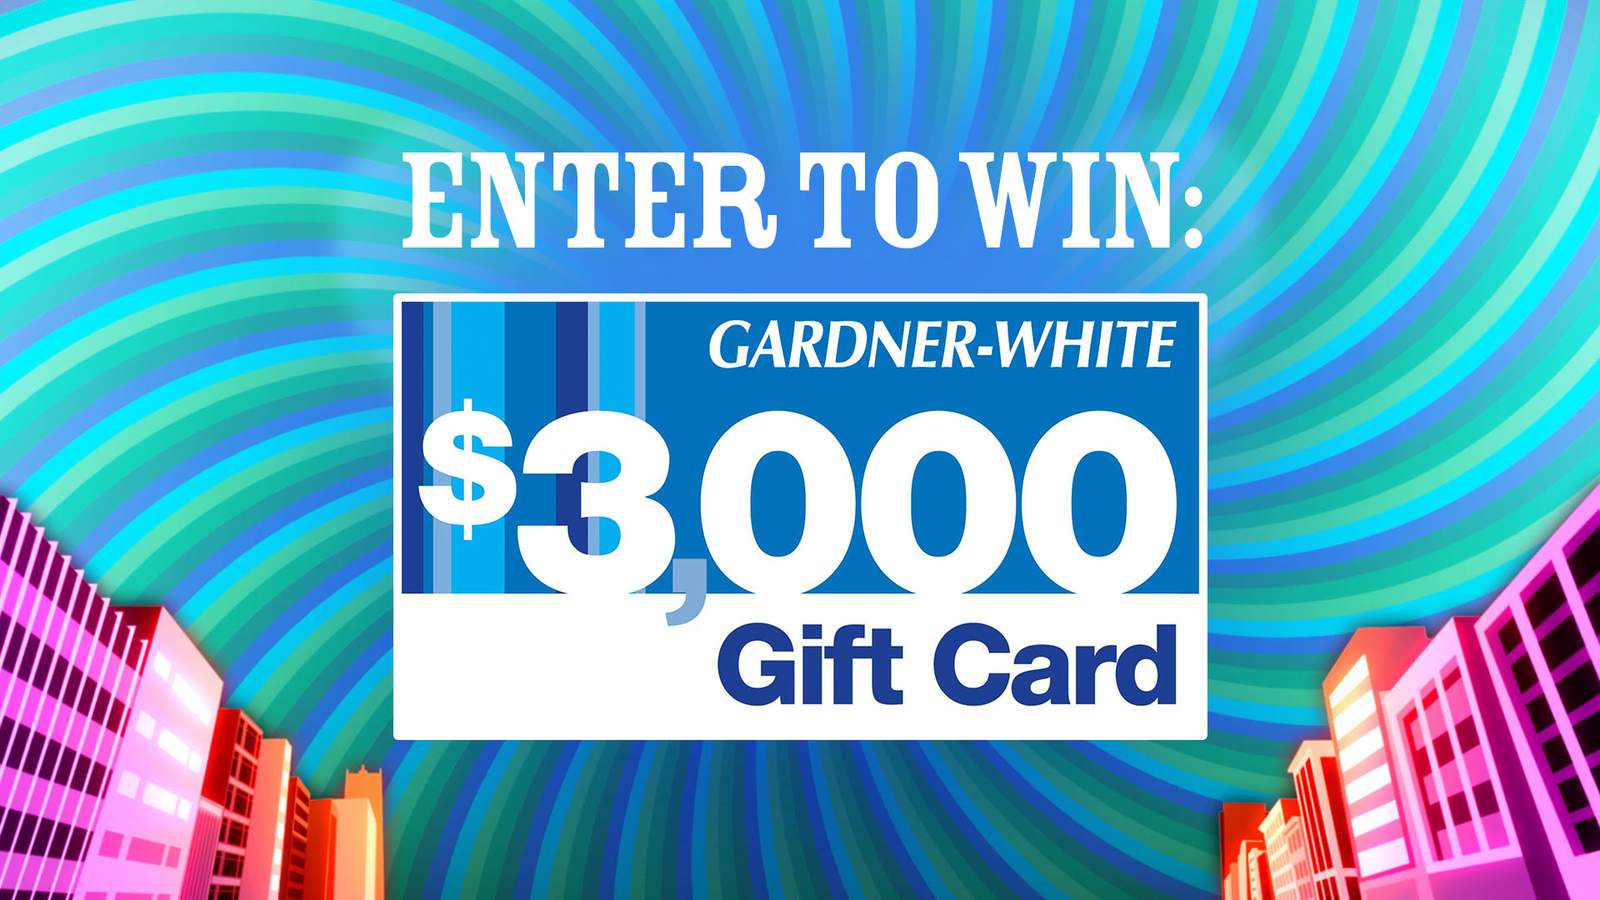 Enter to win: $3,000 Gardner-White Gift Card Giveaway - WDIV ClickOnDetroit